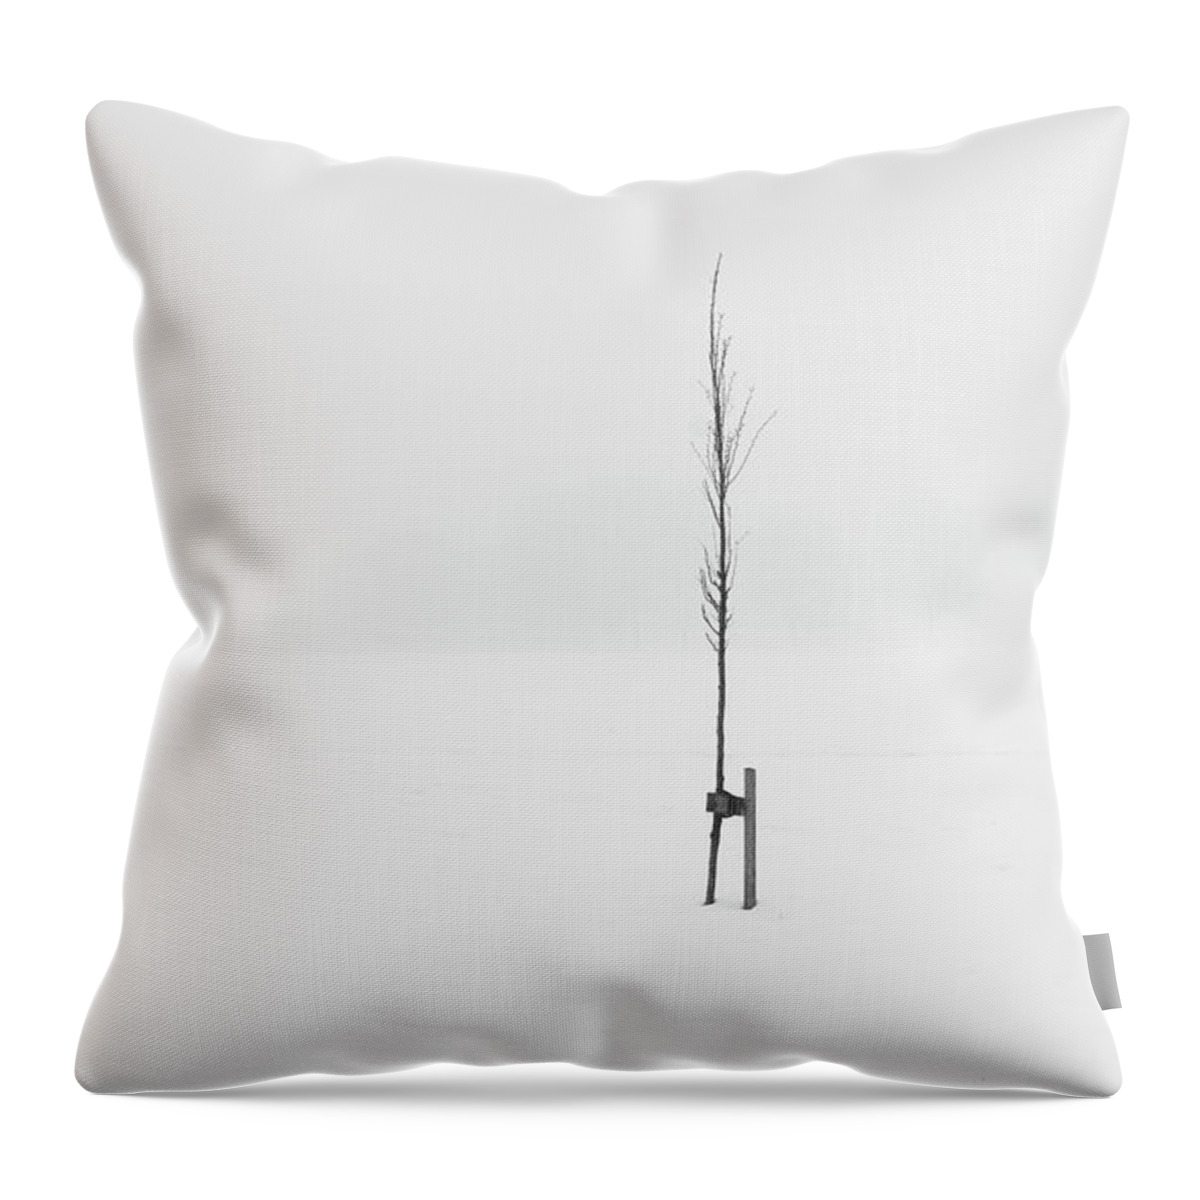 Urban Throw Pillow featuring the photograph Yorkshire Urbanscapes 125 by Stuart Allen